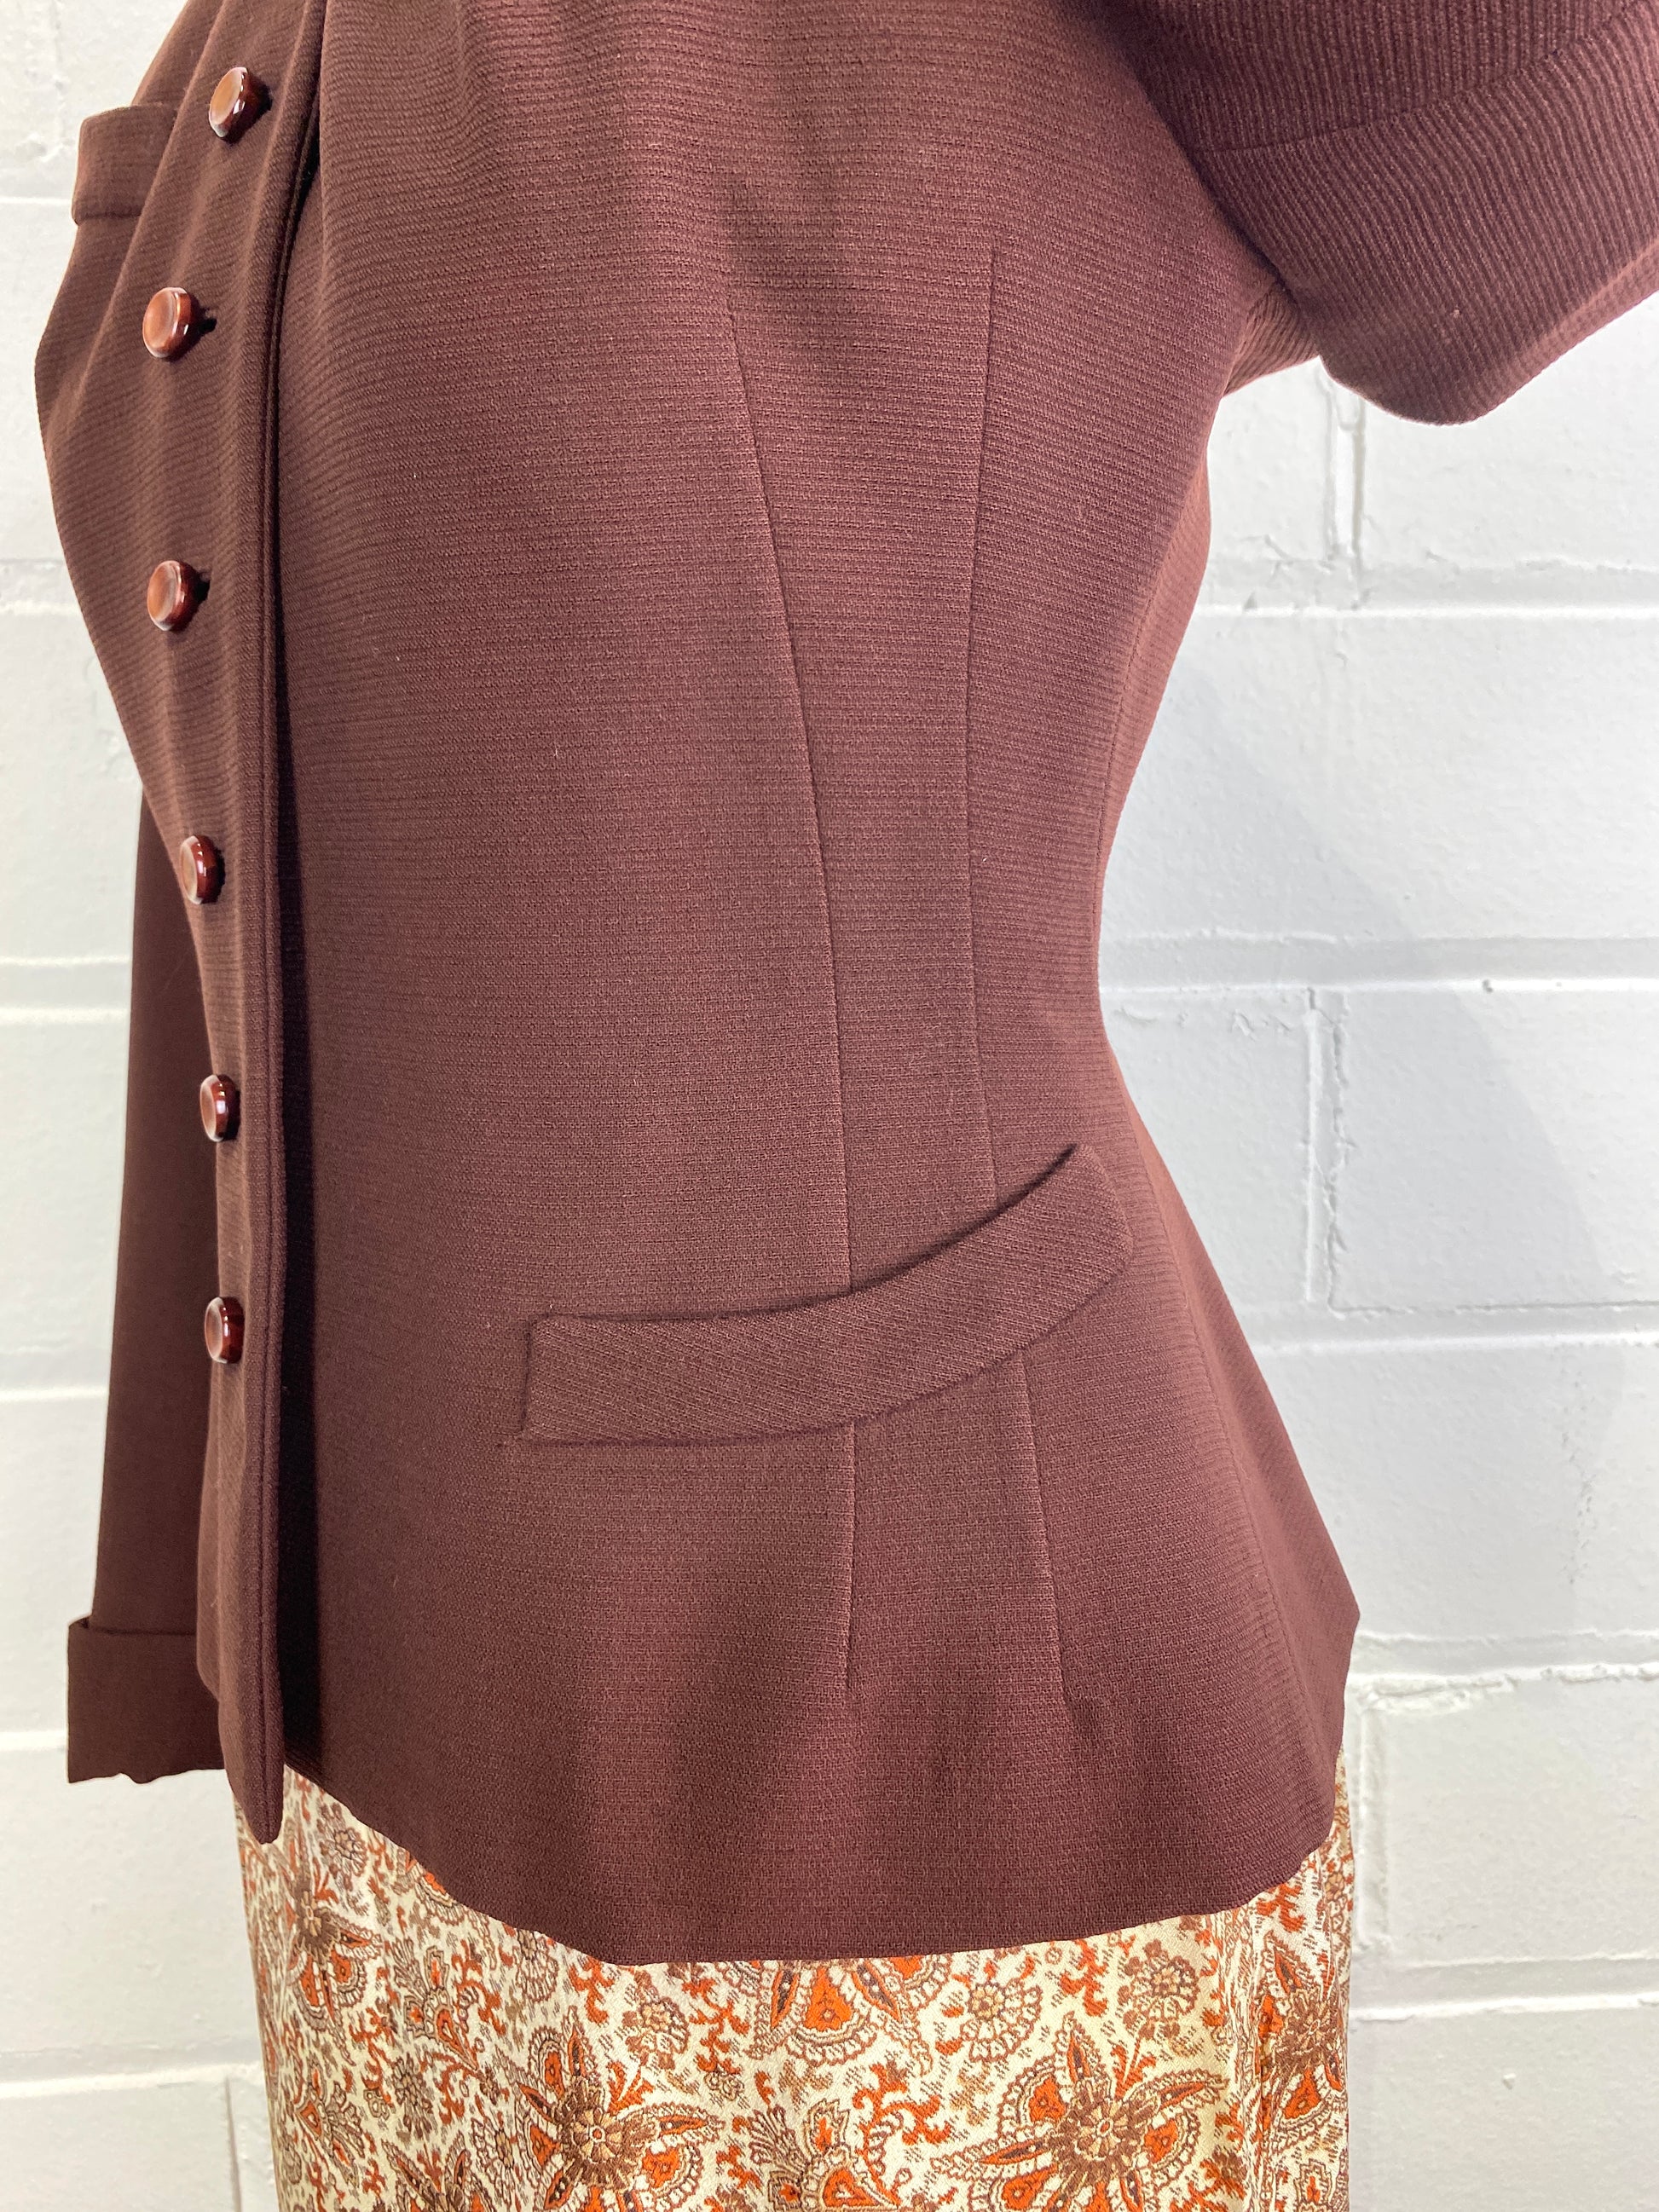 Vintage 1950s Brown Blazer with Bronze Beads, Small